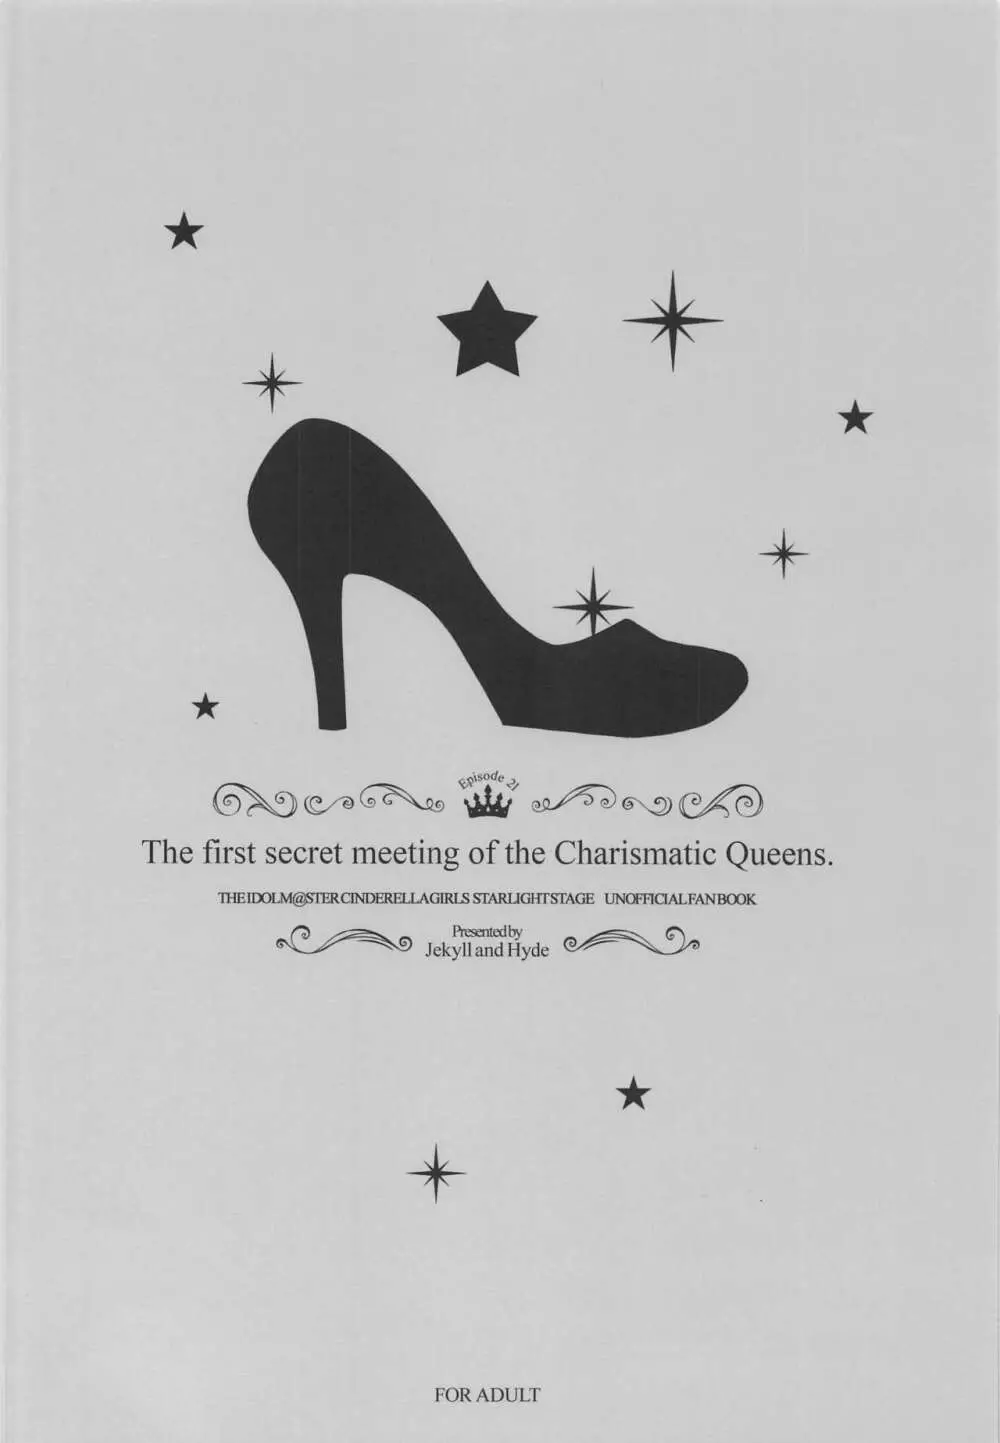 The first secret meeting of the Charismatic Queens. 30ページ